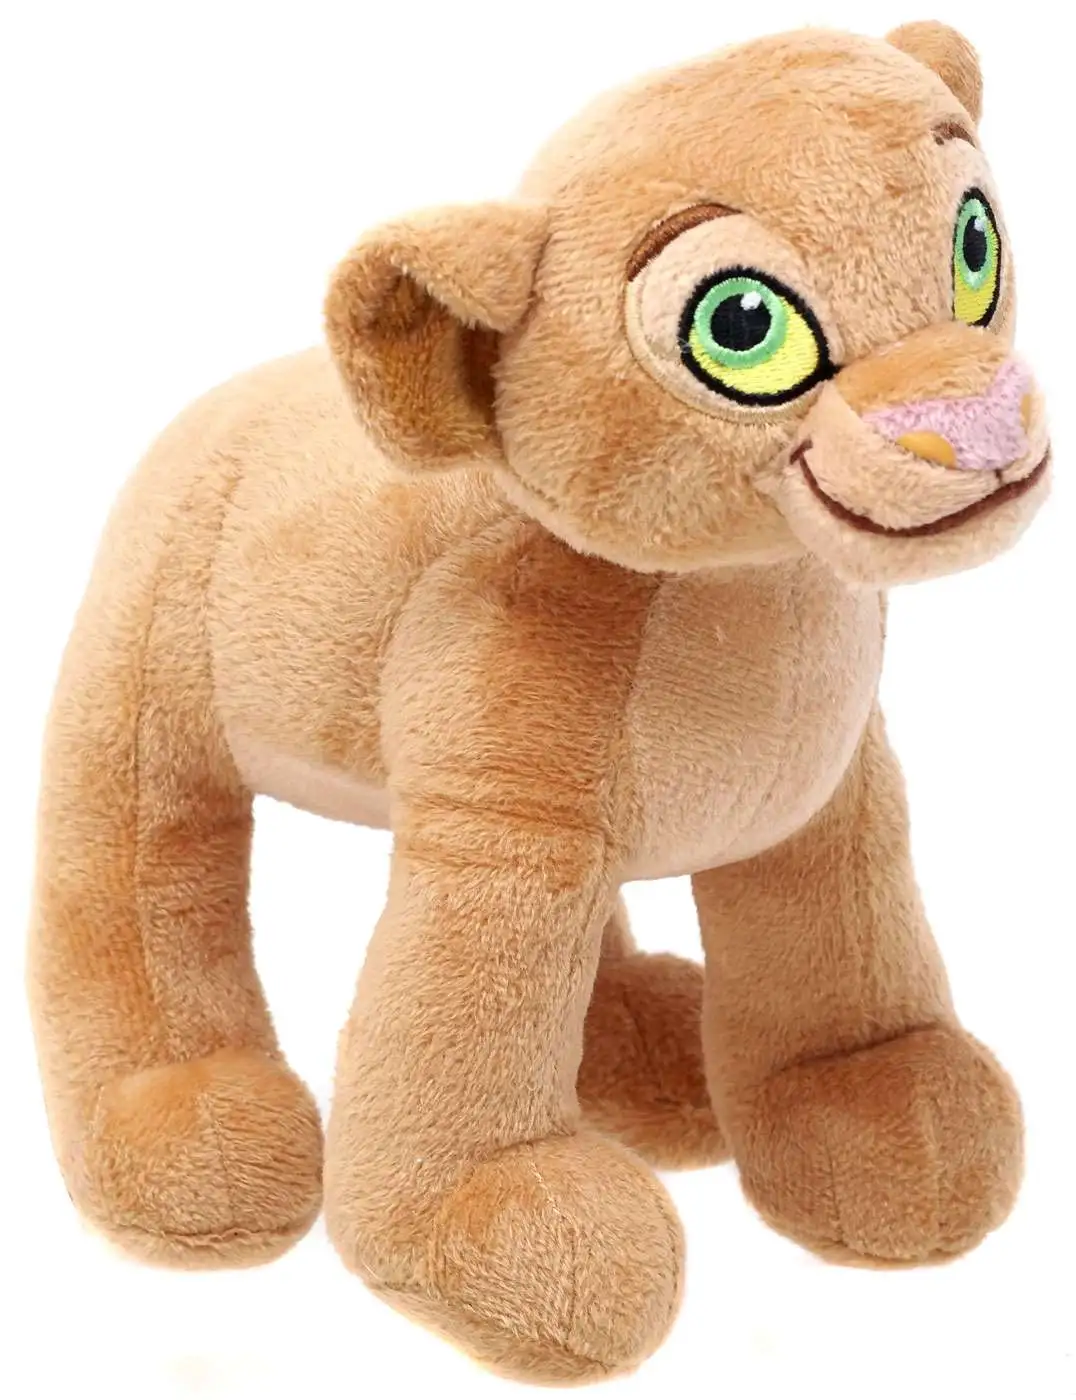 Nala Plush Toy by Just Play 7" 2019 Details about   Disney's The Lion King 